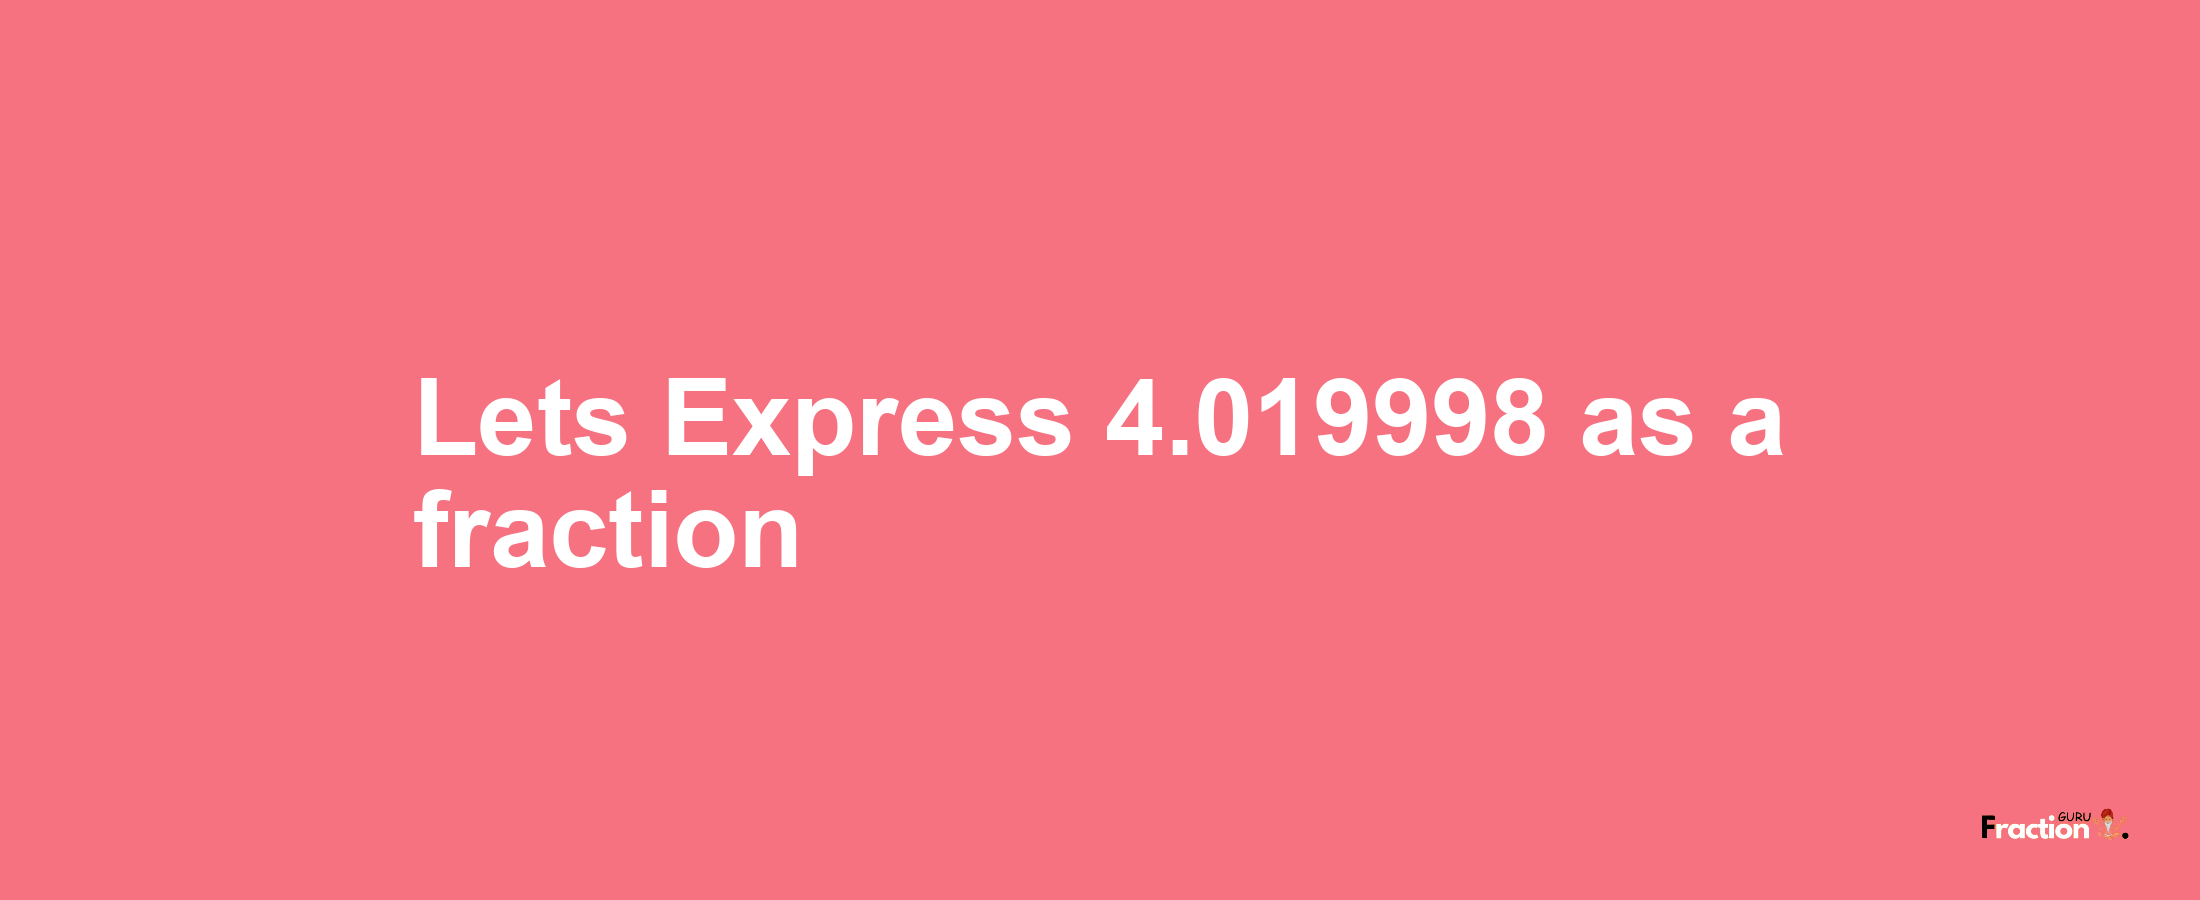 Lets Express 4.019998 as afraction